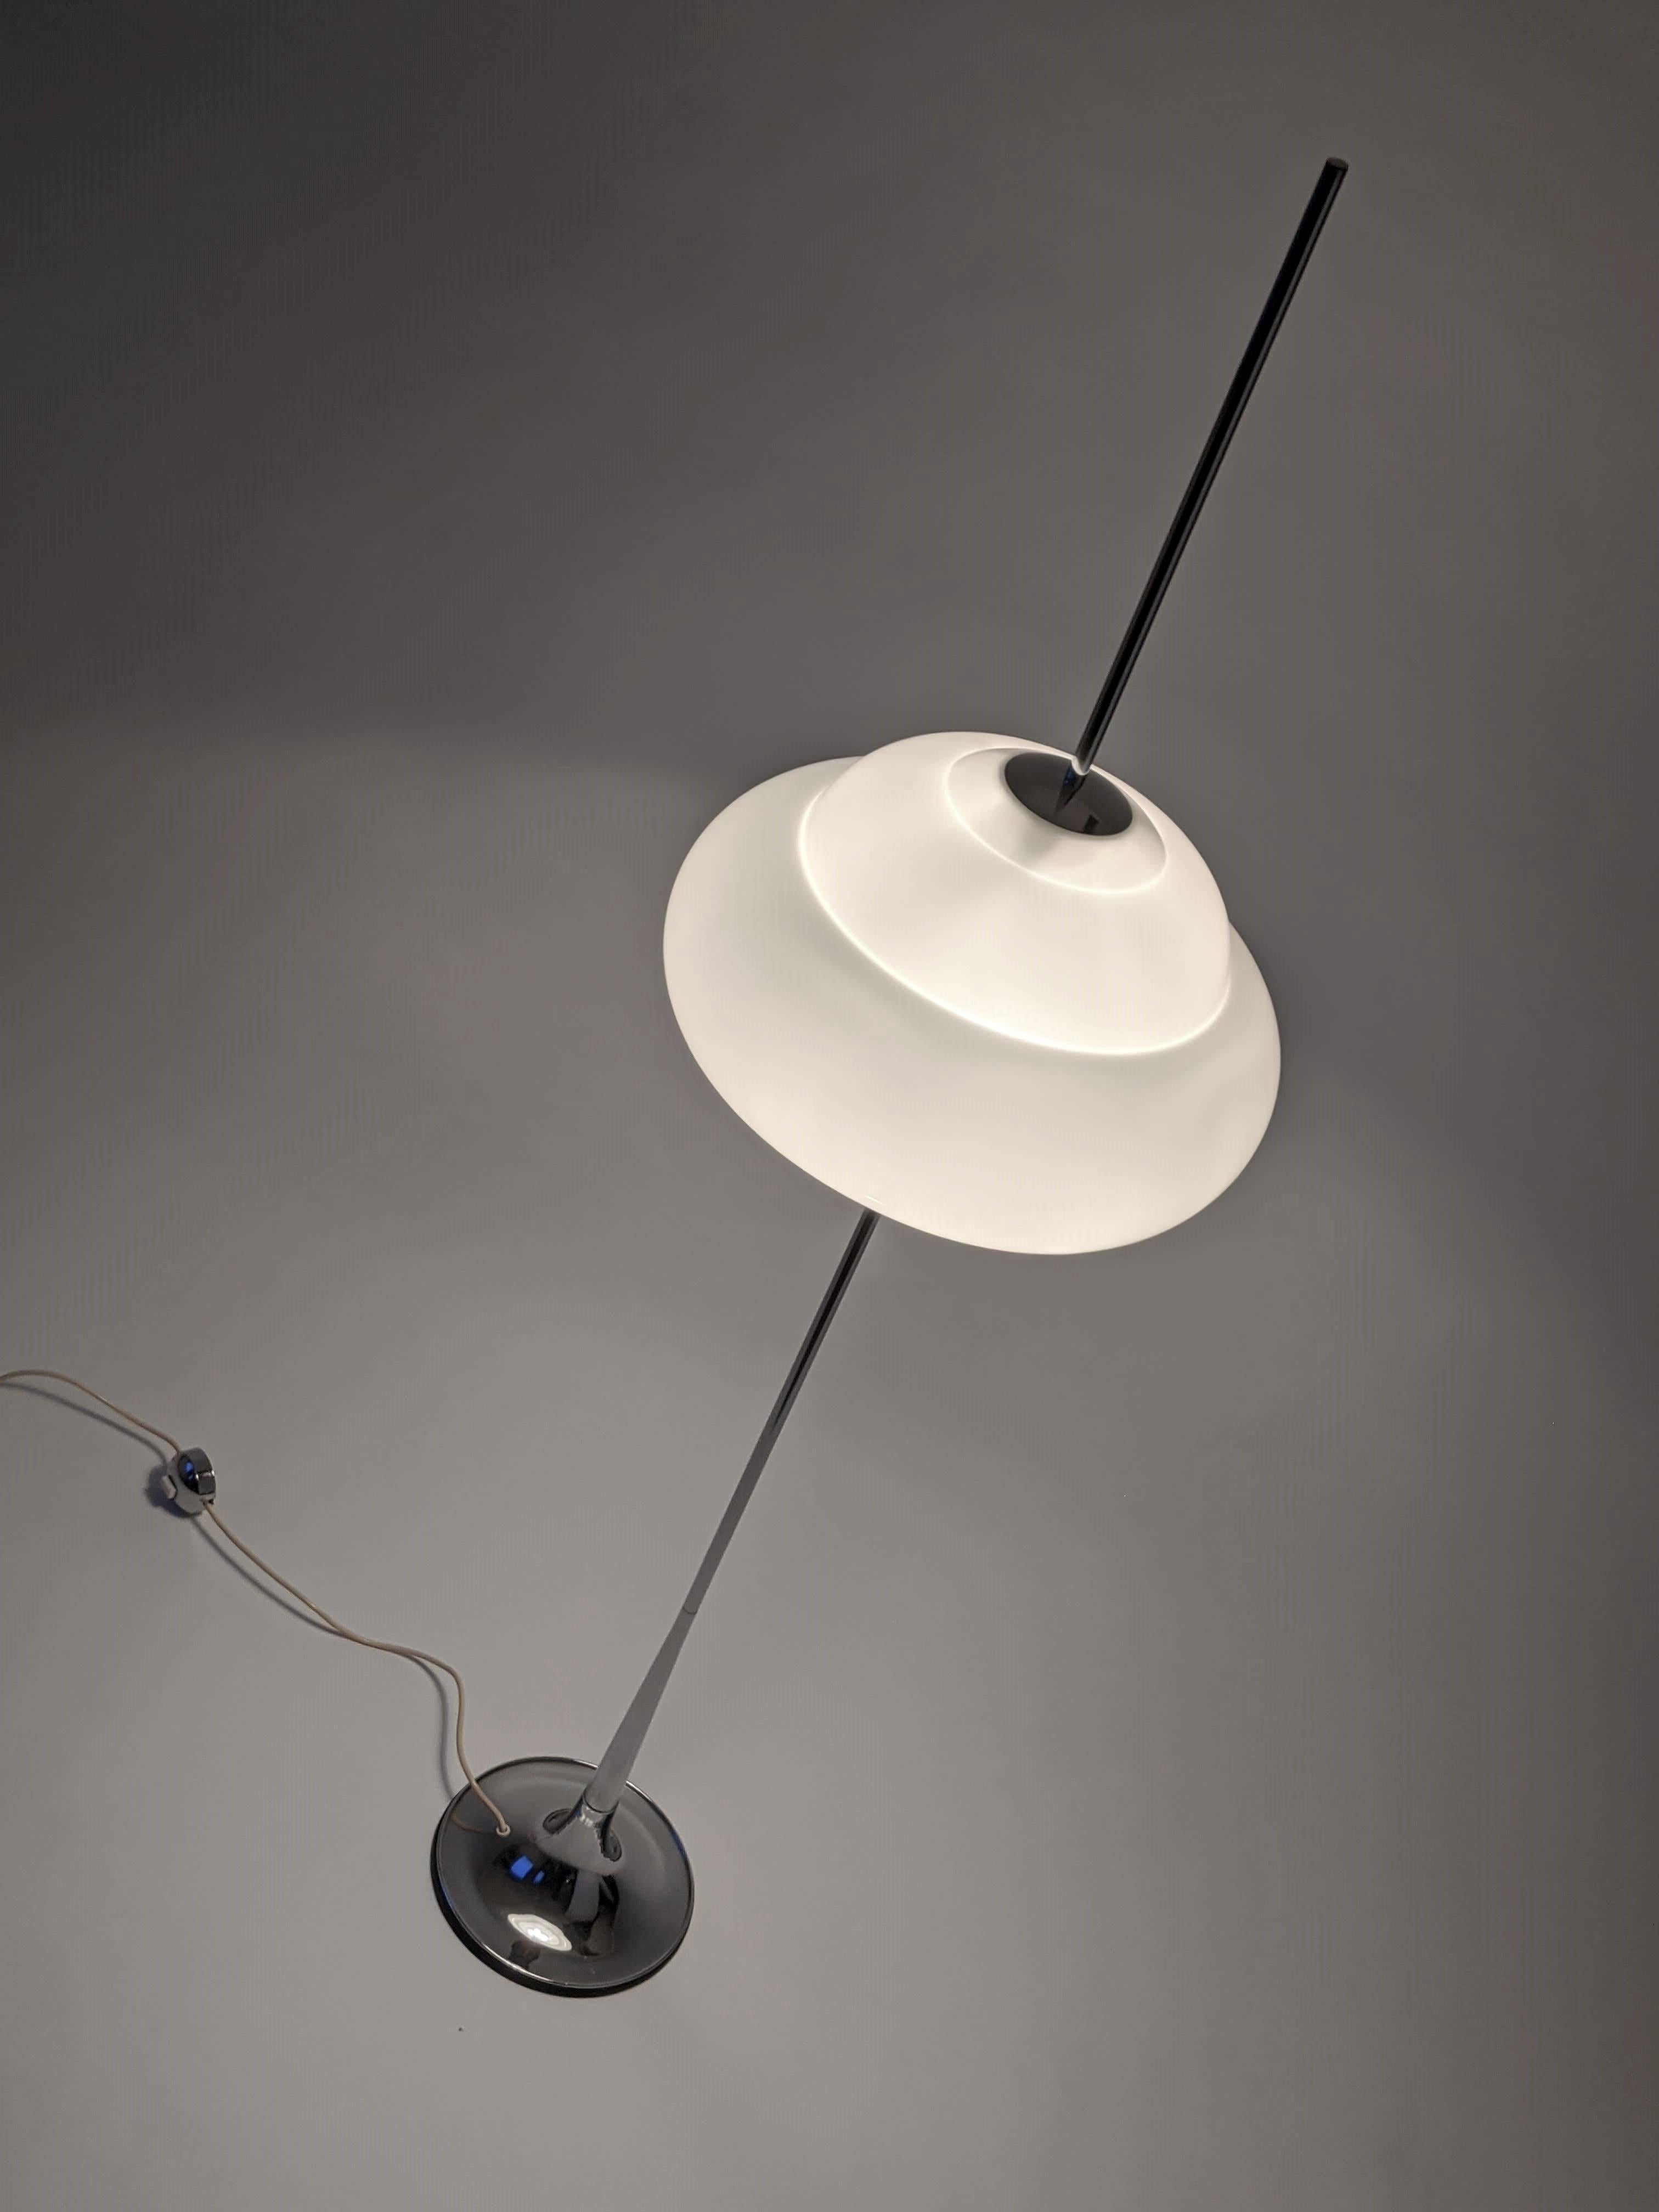 Reggiani Floor lamp with a shade having the apparence of being pierced trought by the chromed pole.

Provide a warm tone when lighted. 

Contain 3 E26 size socket rated at 60 watt each with individual chain pull switch. 

Foot switch on cord.